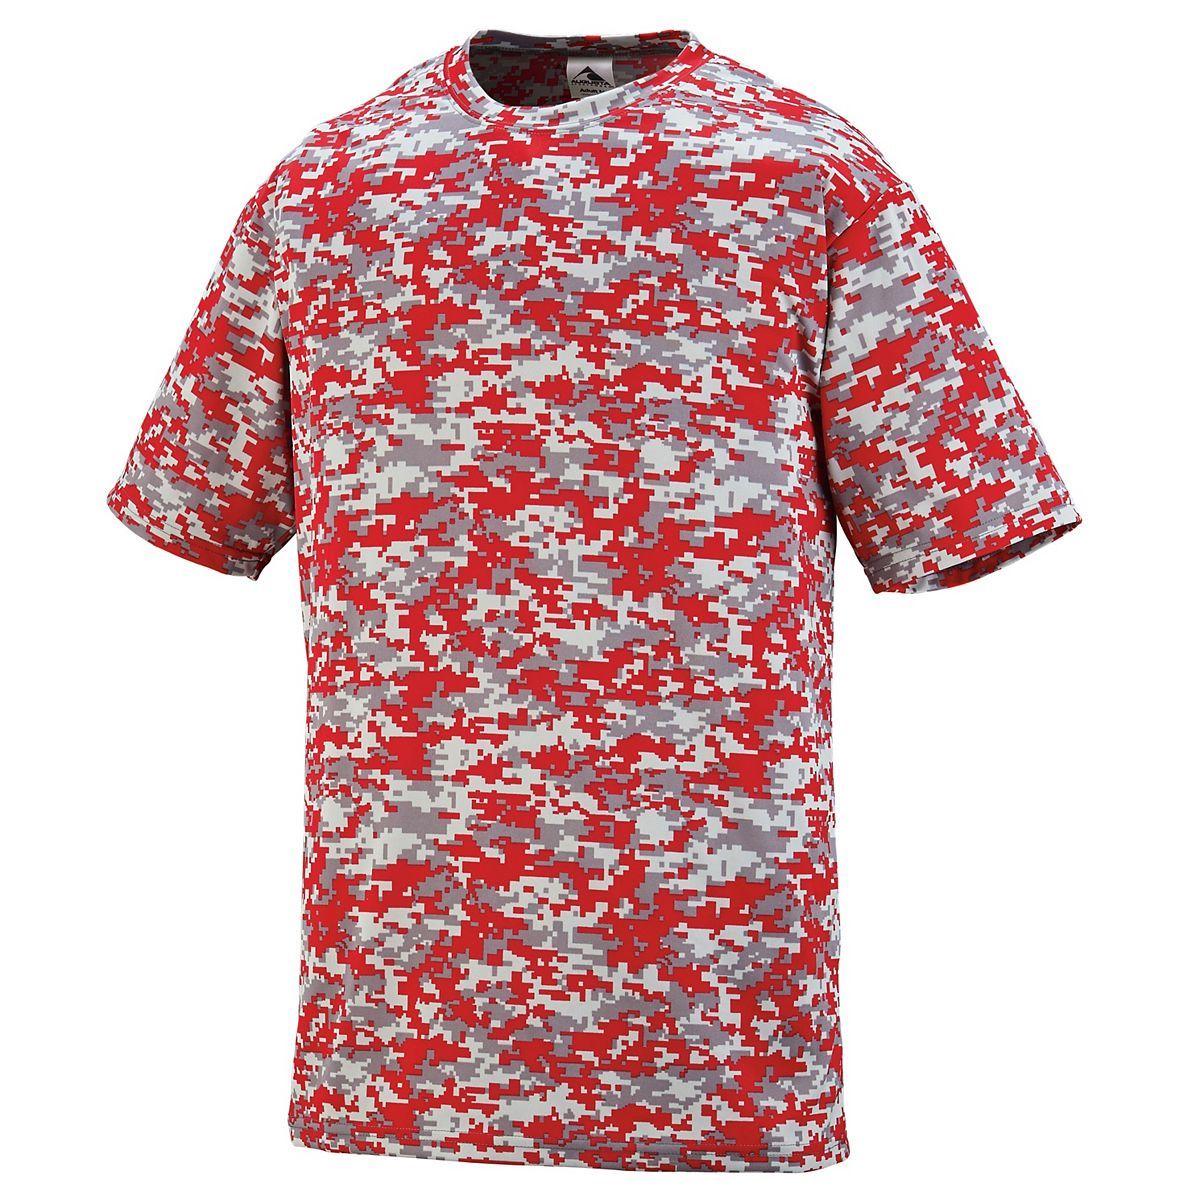 Augusta Sportswear Youth Digi Camo Wicking T-Shirt in Red Digi  -Part of the Youth, Youth-Tee-Shirt, T-Shirts, Augusta-Products, Shirts product lines at KanaleyCreations.com